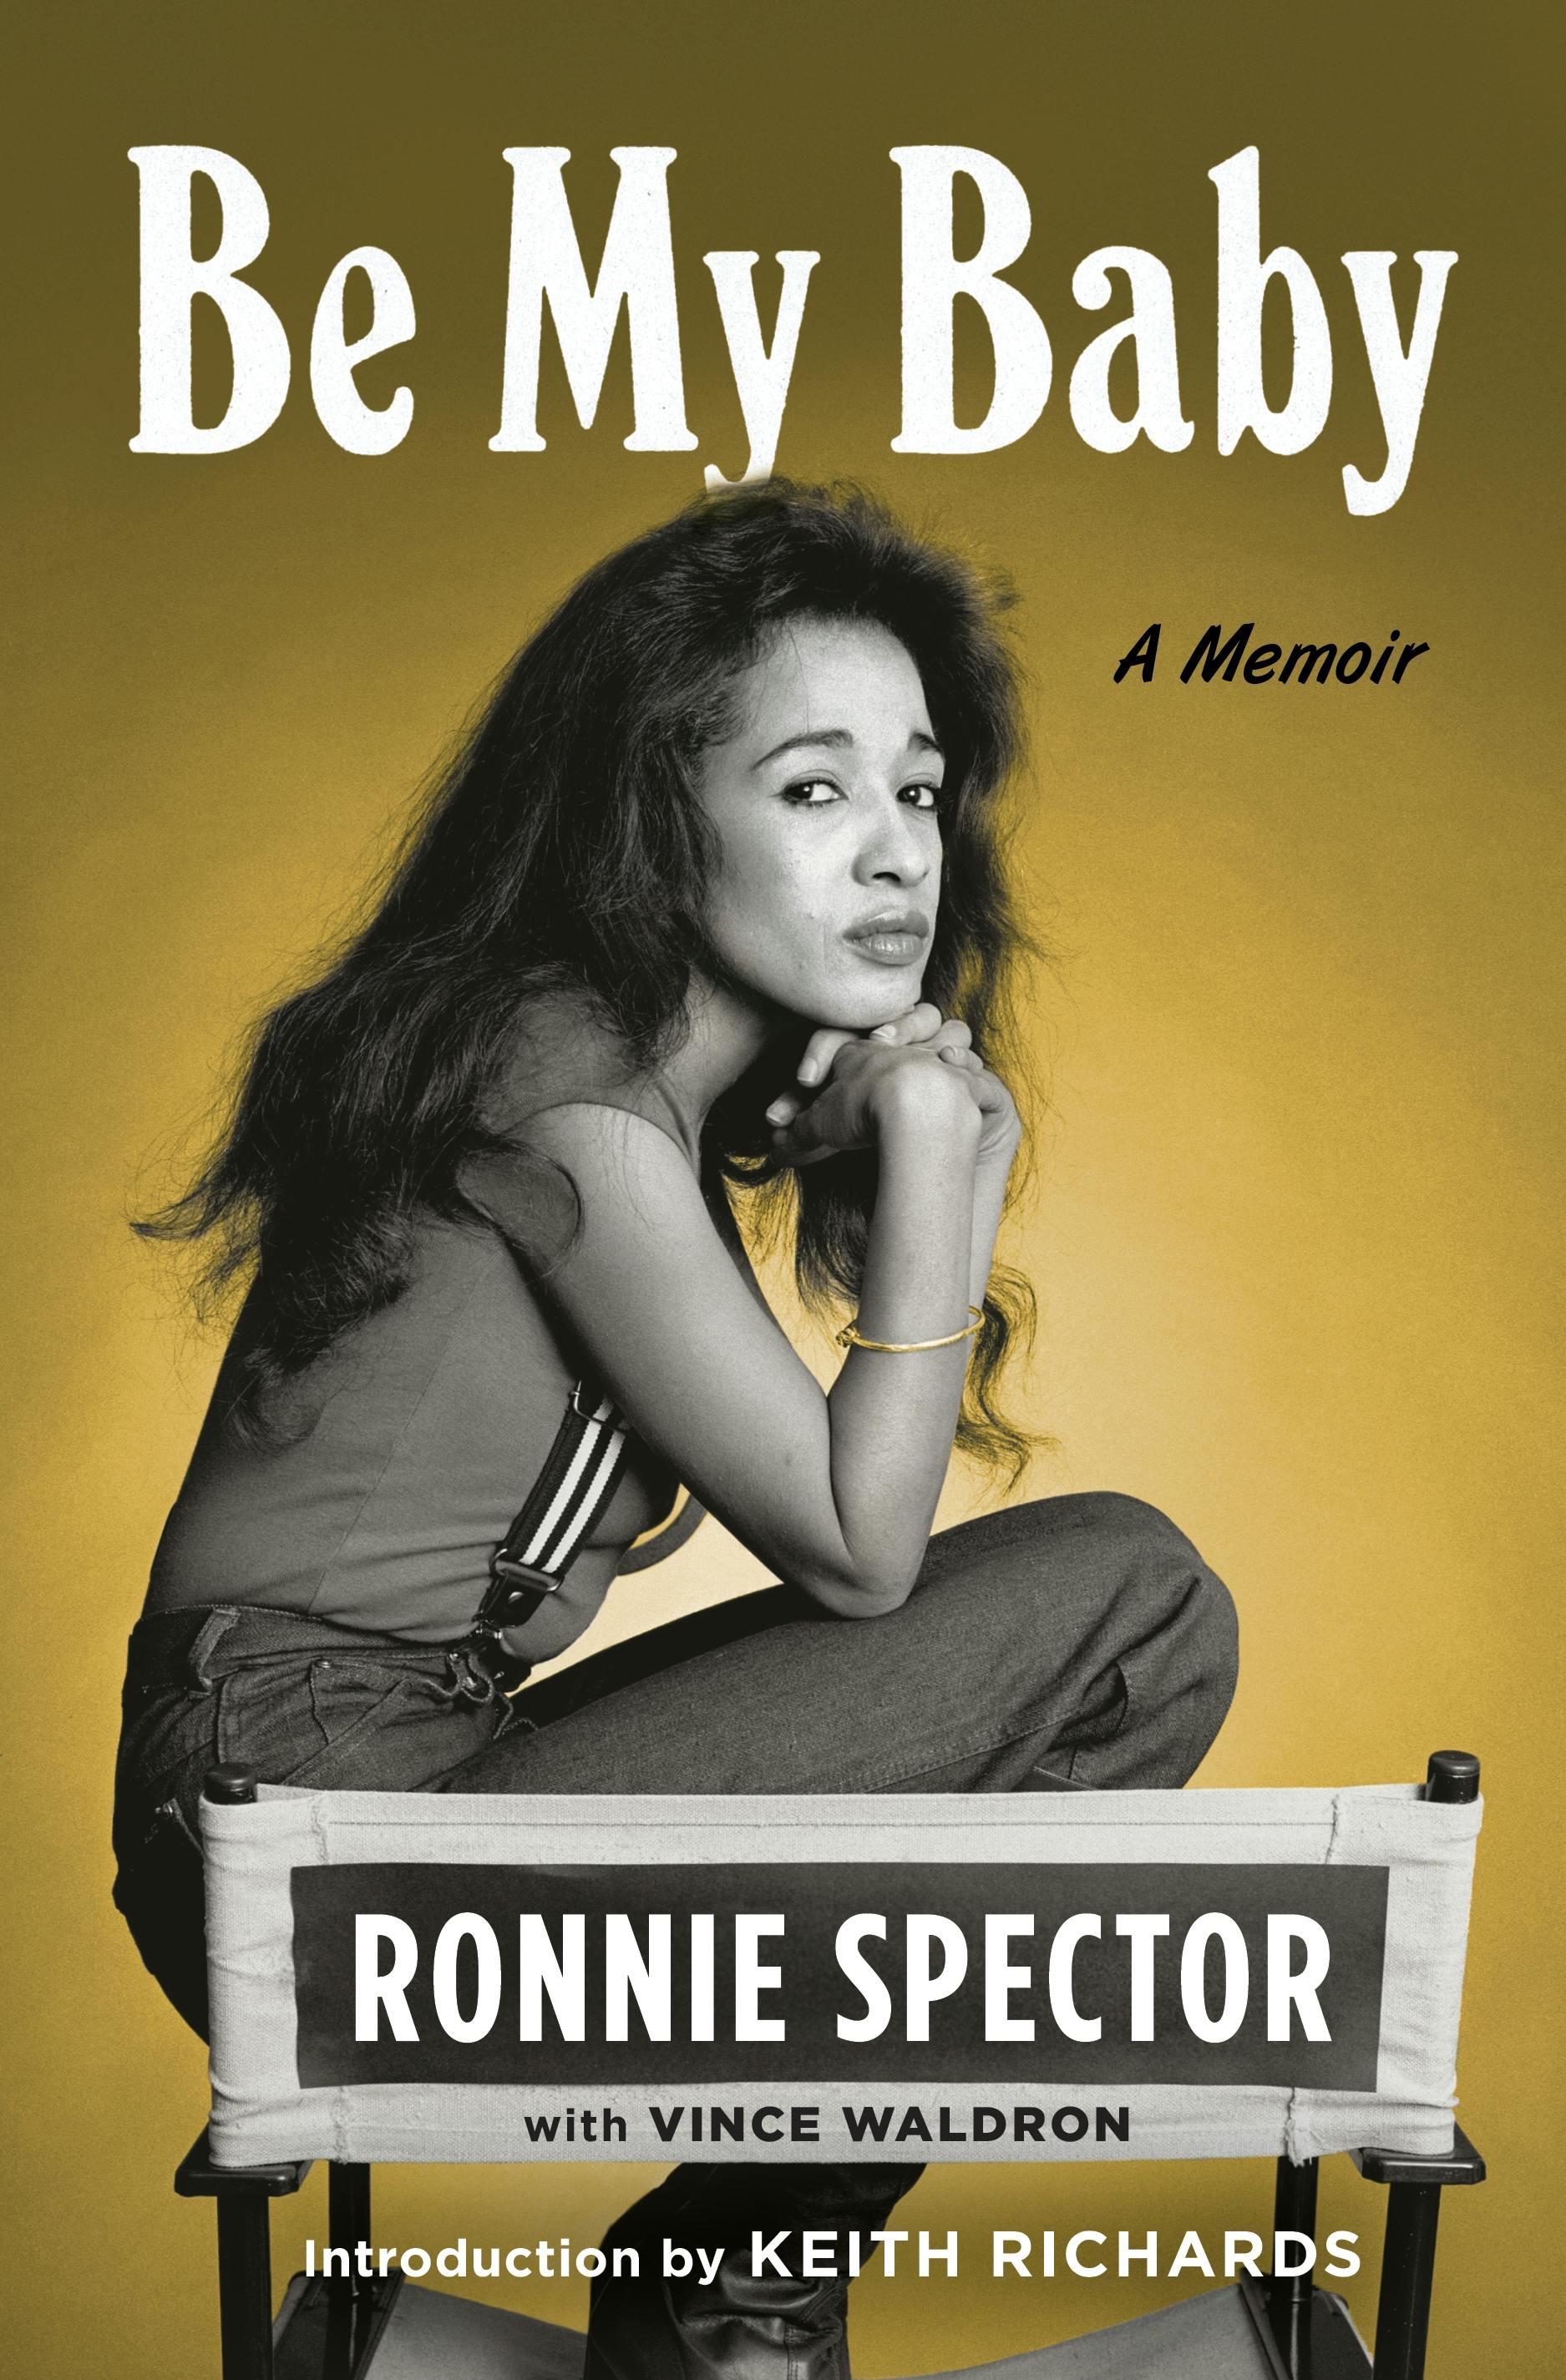 Be My Baby by Ronnie Spector with Vince Waldron